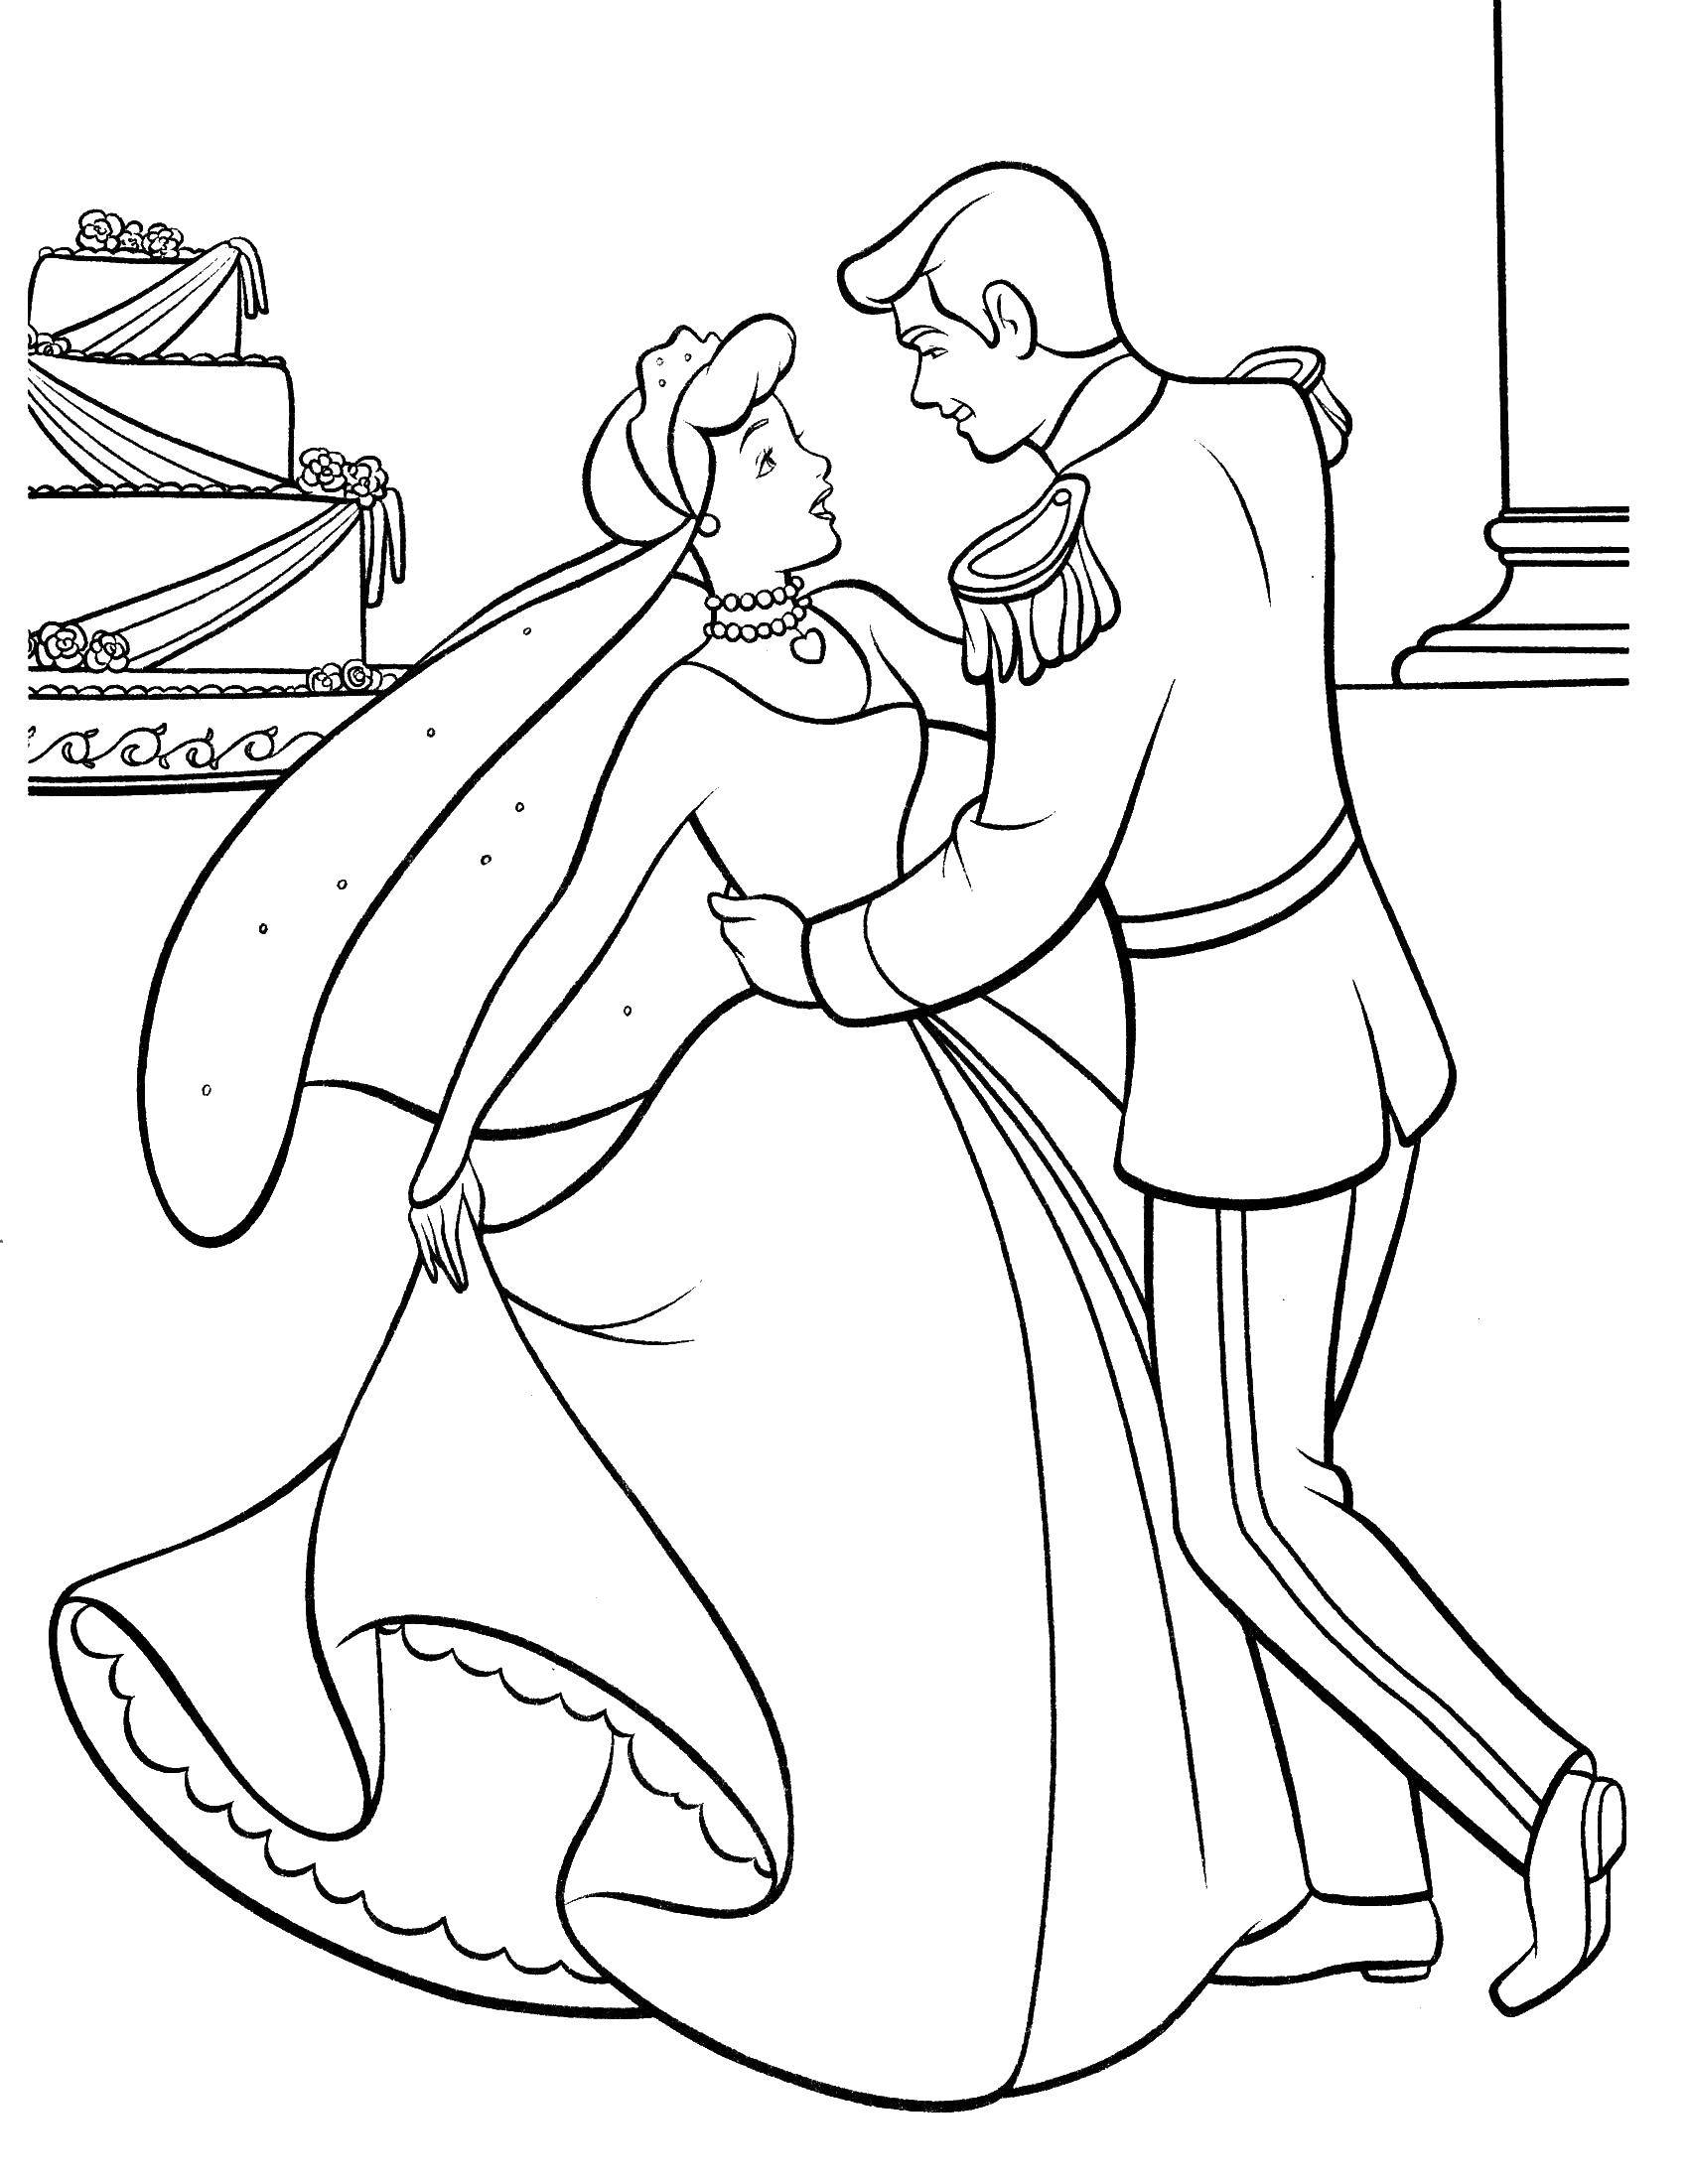 Coloring Cinderella and the Prince at the wedding. Category Cinderella and the Prince. Tags:  Cinderella.